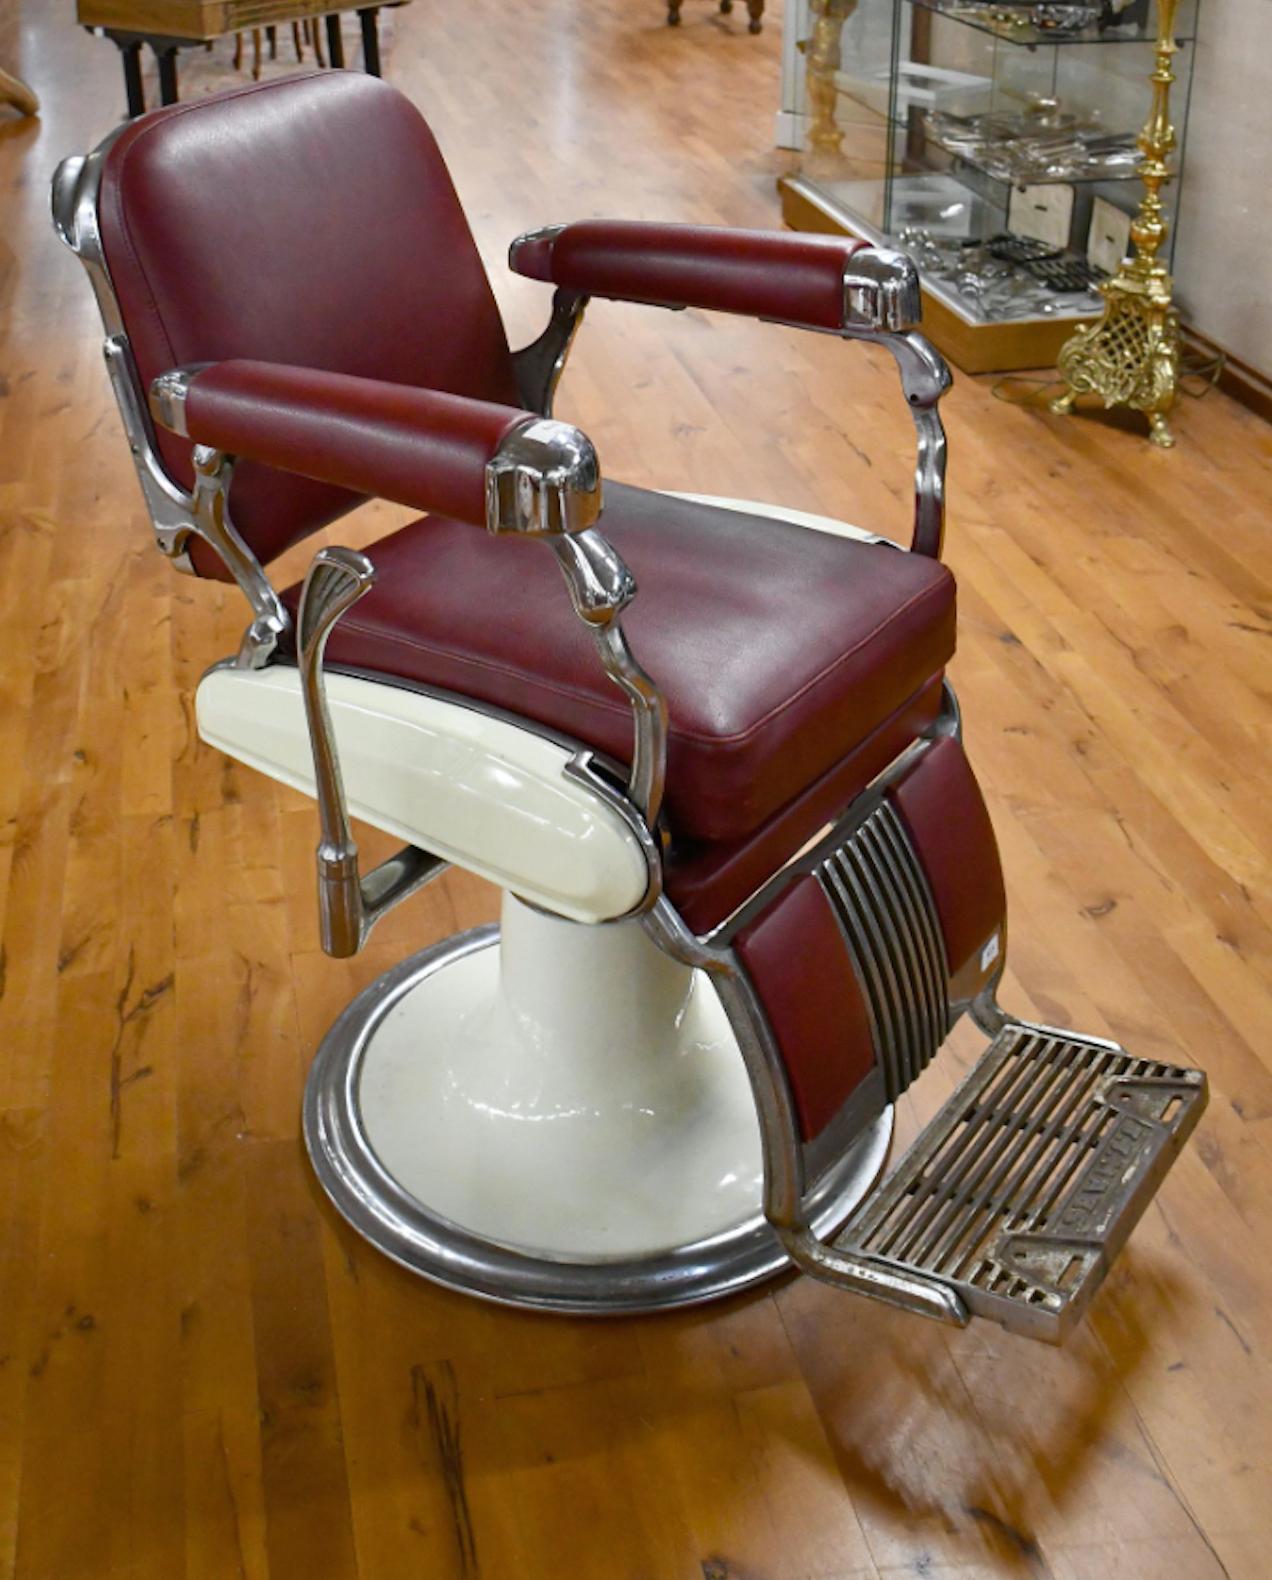 Vintage J.J. Maes fauteuil de barbier recently reupholstered in dark red leather. Circa 1950